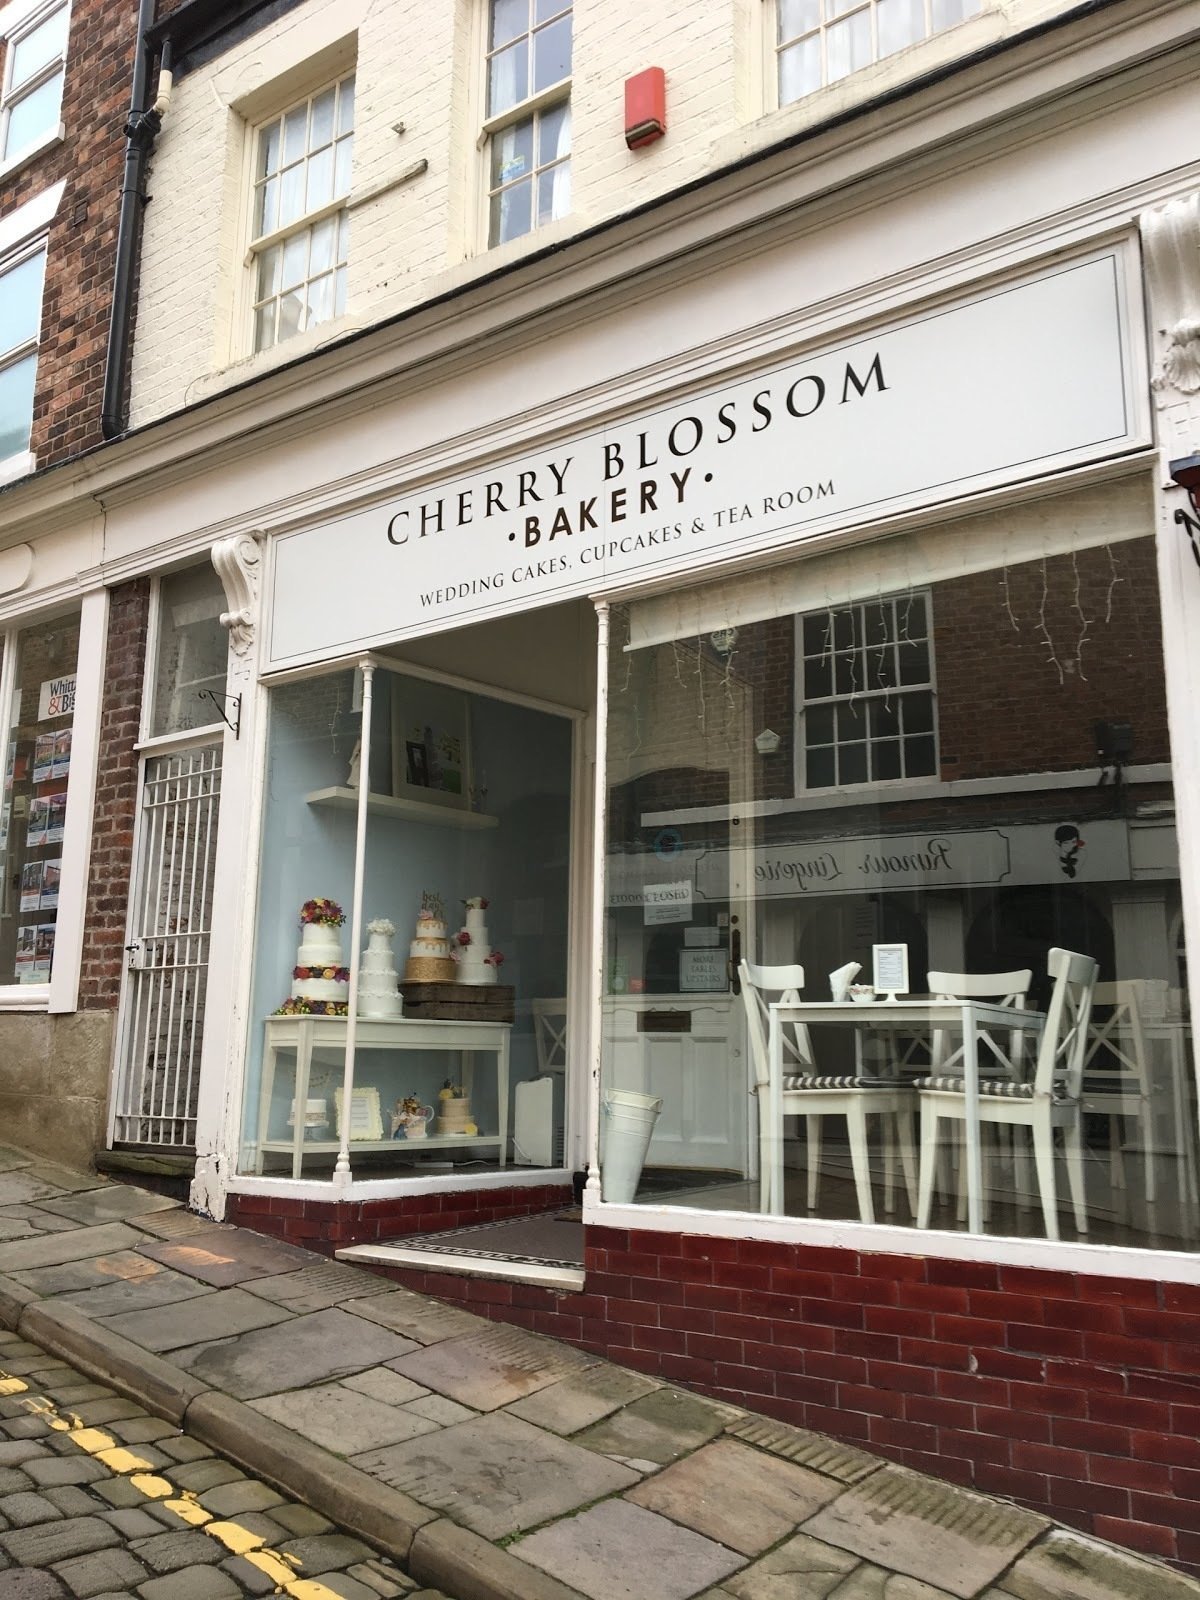 <span class="translation_missing" title="translation missing: en.meta.location_title, location_name: Cherry Blossom Bakery, city: Macclesfield">Location Title</span>